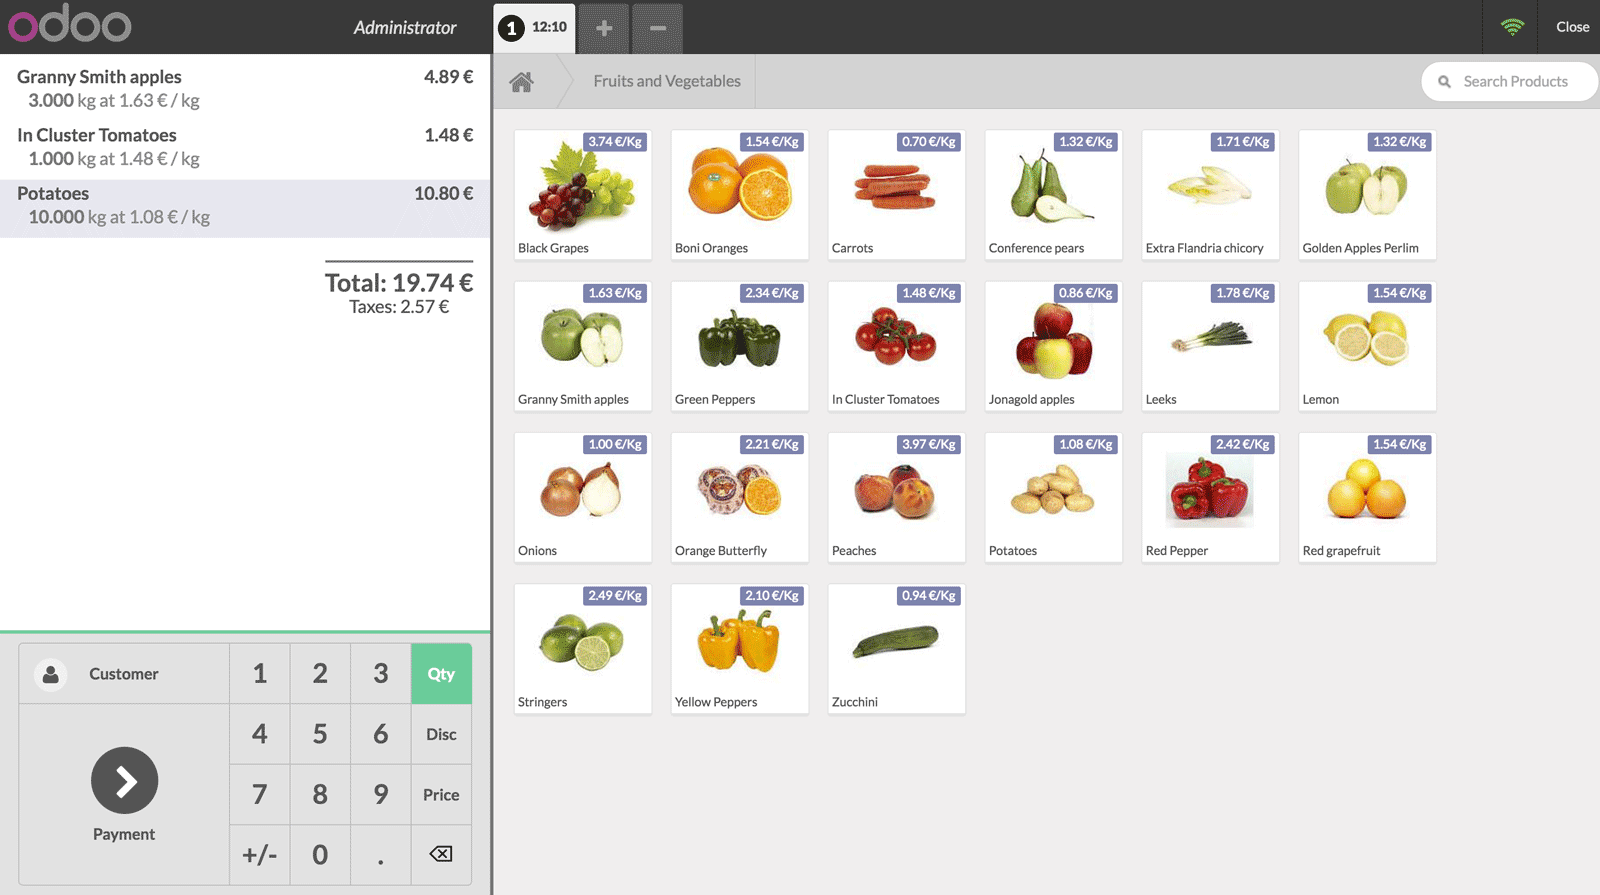 Odoo Point of Sale - Cash register interface showing a list of fruit and vegetables